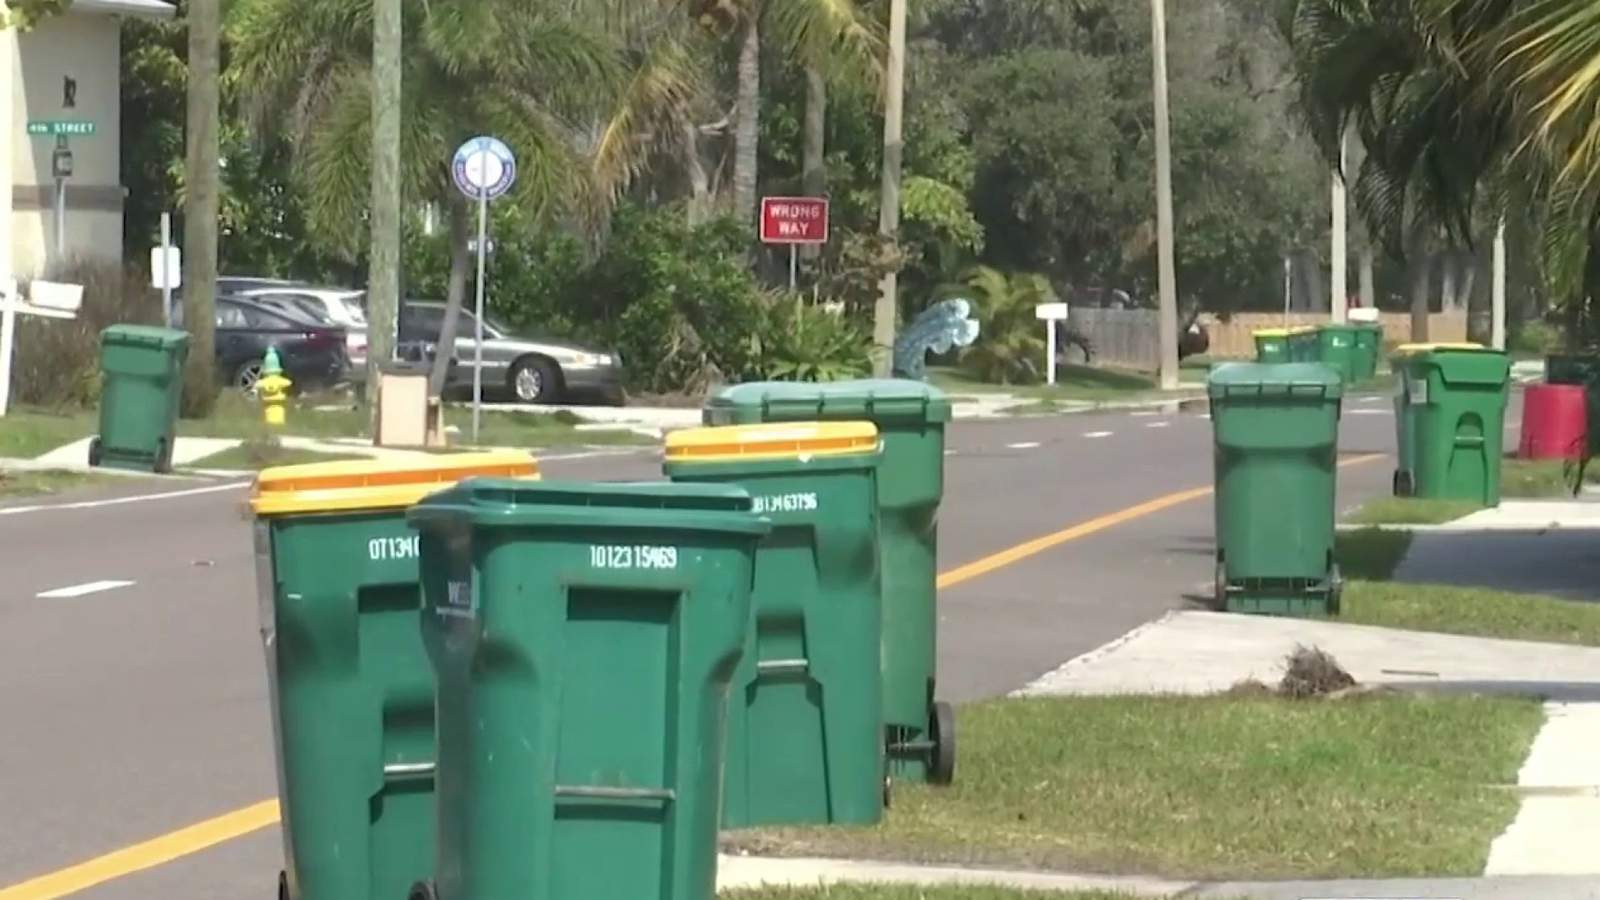 Brevard County trash collection rates to jump 39 under proposed